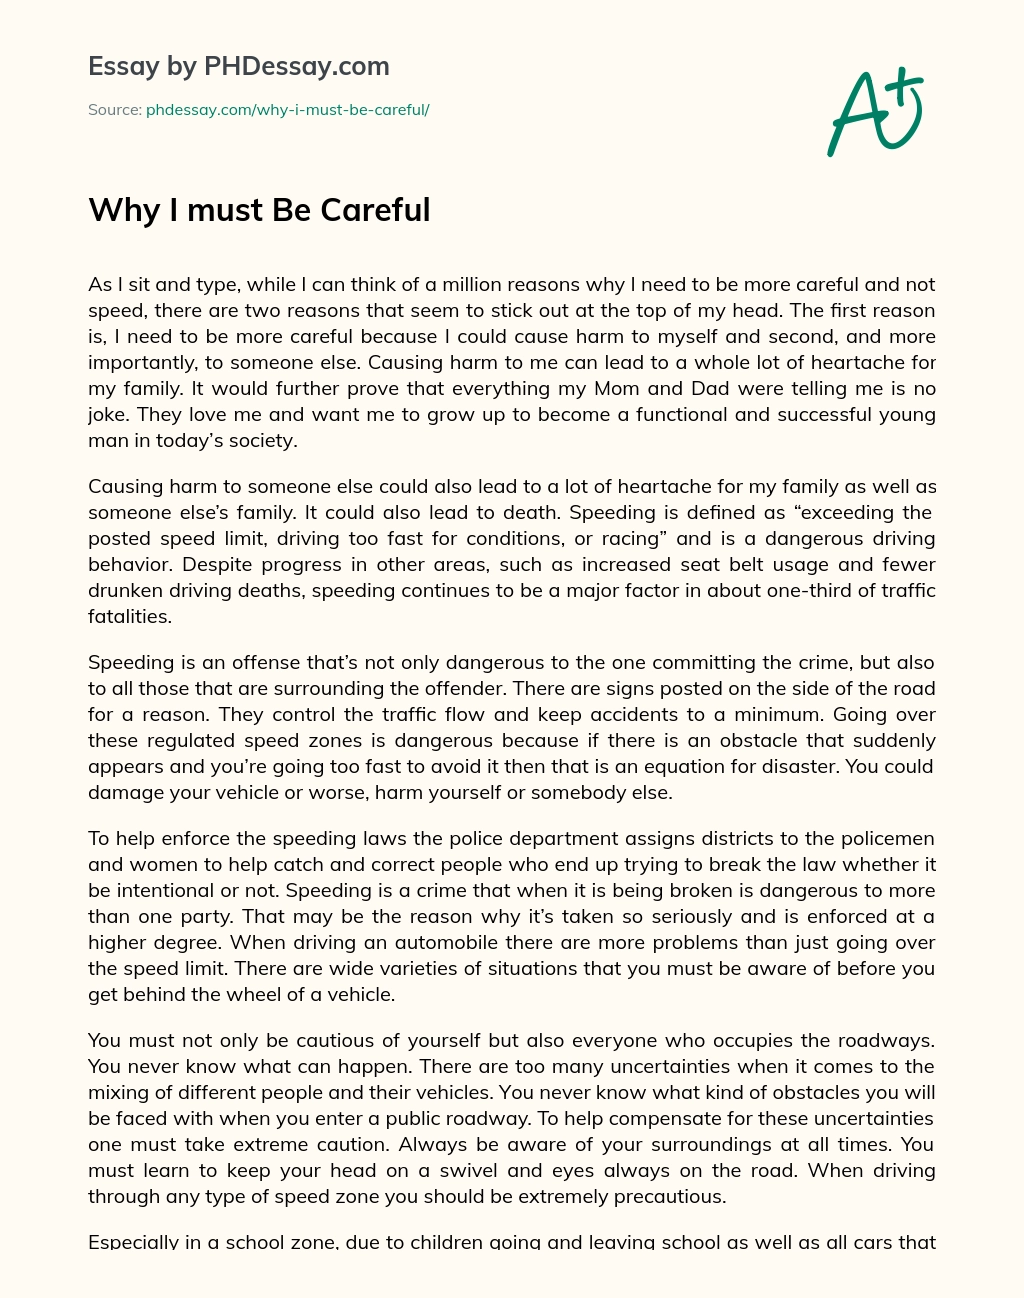 Why I must Be Careful essay